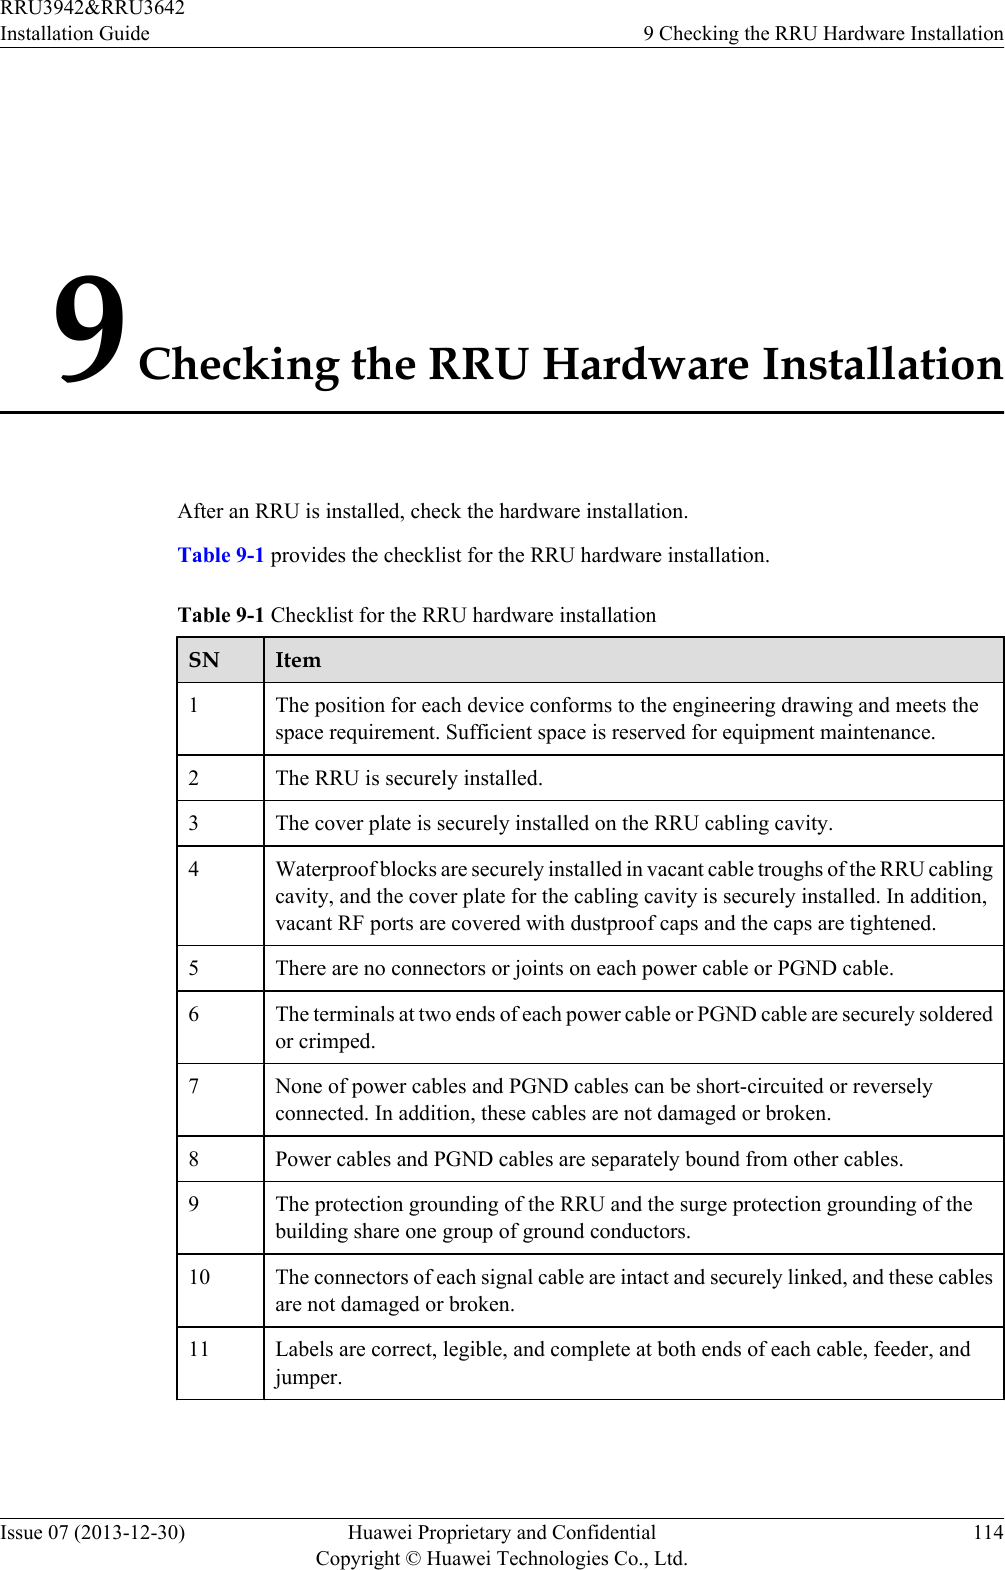 9 Checking the RRU Hardware InstallationAfter an RRU is installed, check the hardware installation.Table 9-1 provides the checklist for the RRU hardware installation.Table 9-1 Checklist for the RRU hardware installationSN Item1The position for each device conforms to the engineering drawing and meets thespace requirement. Sufficient space is reserved for equipment maintenance.2 The RRU is securely installed.3 The cover plate is securely installed on the RRU cabling cavity.4 Waterproof blocks are securely installed in vacant cable troughs of the RRU cablingcavity, and the cover plate for the cabling cavity is securely installed. In addition,vacant RF ports are covered with dustproof caps and the caps are tightened.5 There are no connectors or joints on each power cable or PGND cable.6 The terminals at two ends of each power cable or PGND cable are securely solderedor crimped.7 None of power cables and PGND cables can be short-circuited or reverselyconnected. In addition, these cables are not damaged or broken.8 Power cables and PGND cables are separately bound from other cables.9 The protection grounding of the RRU and the surge protection grounding of thebuilding share one group of ground conductors.10 The connectors of each signal cable are intact and securely linked, and these cablesare not damaged or broken.11 Labels are correct, legible, and complete at both ends of each cable, feeder, andjumper.RRU3942&amp;RRU3642Installation Guide 9 Checking the RRU Hardware InstallationIssue 07 (2013-12-30) Huawei Proprietary and ConfidentialCopyright © Huawei Technologies Co., Ltd.114